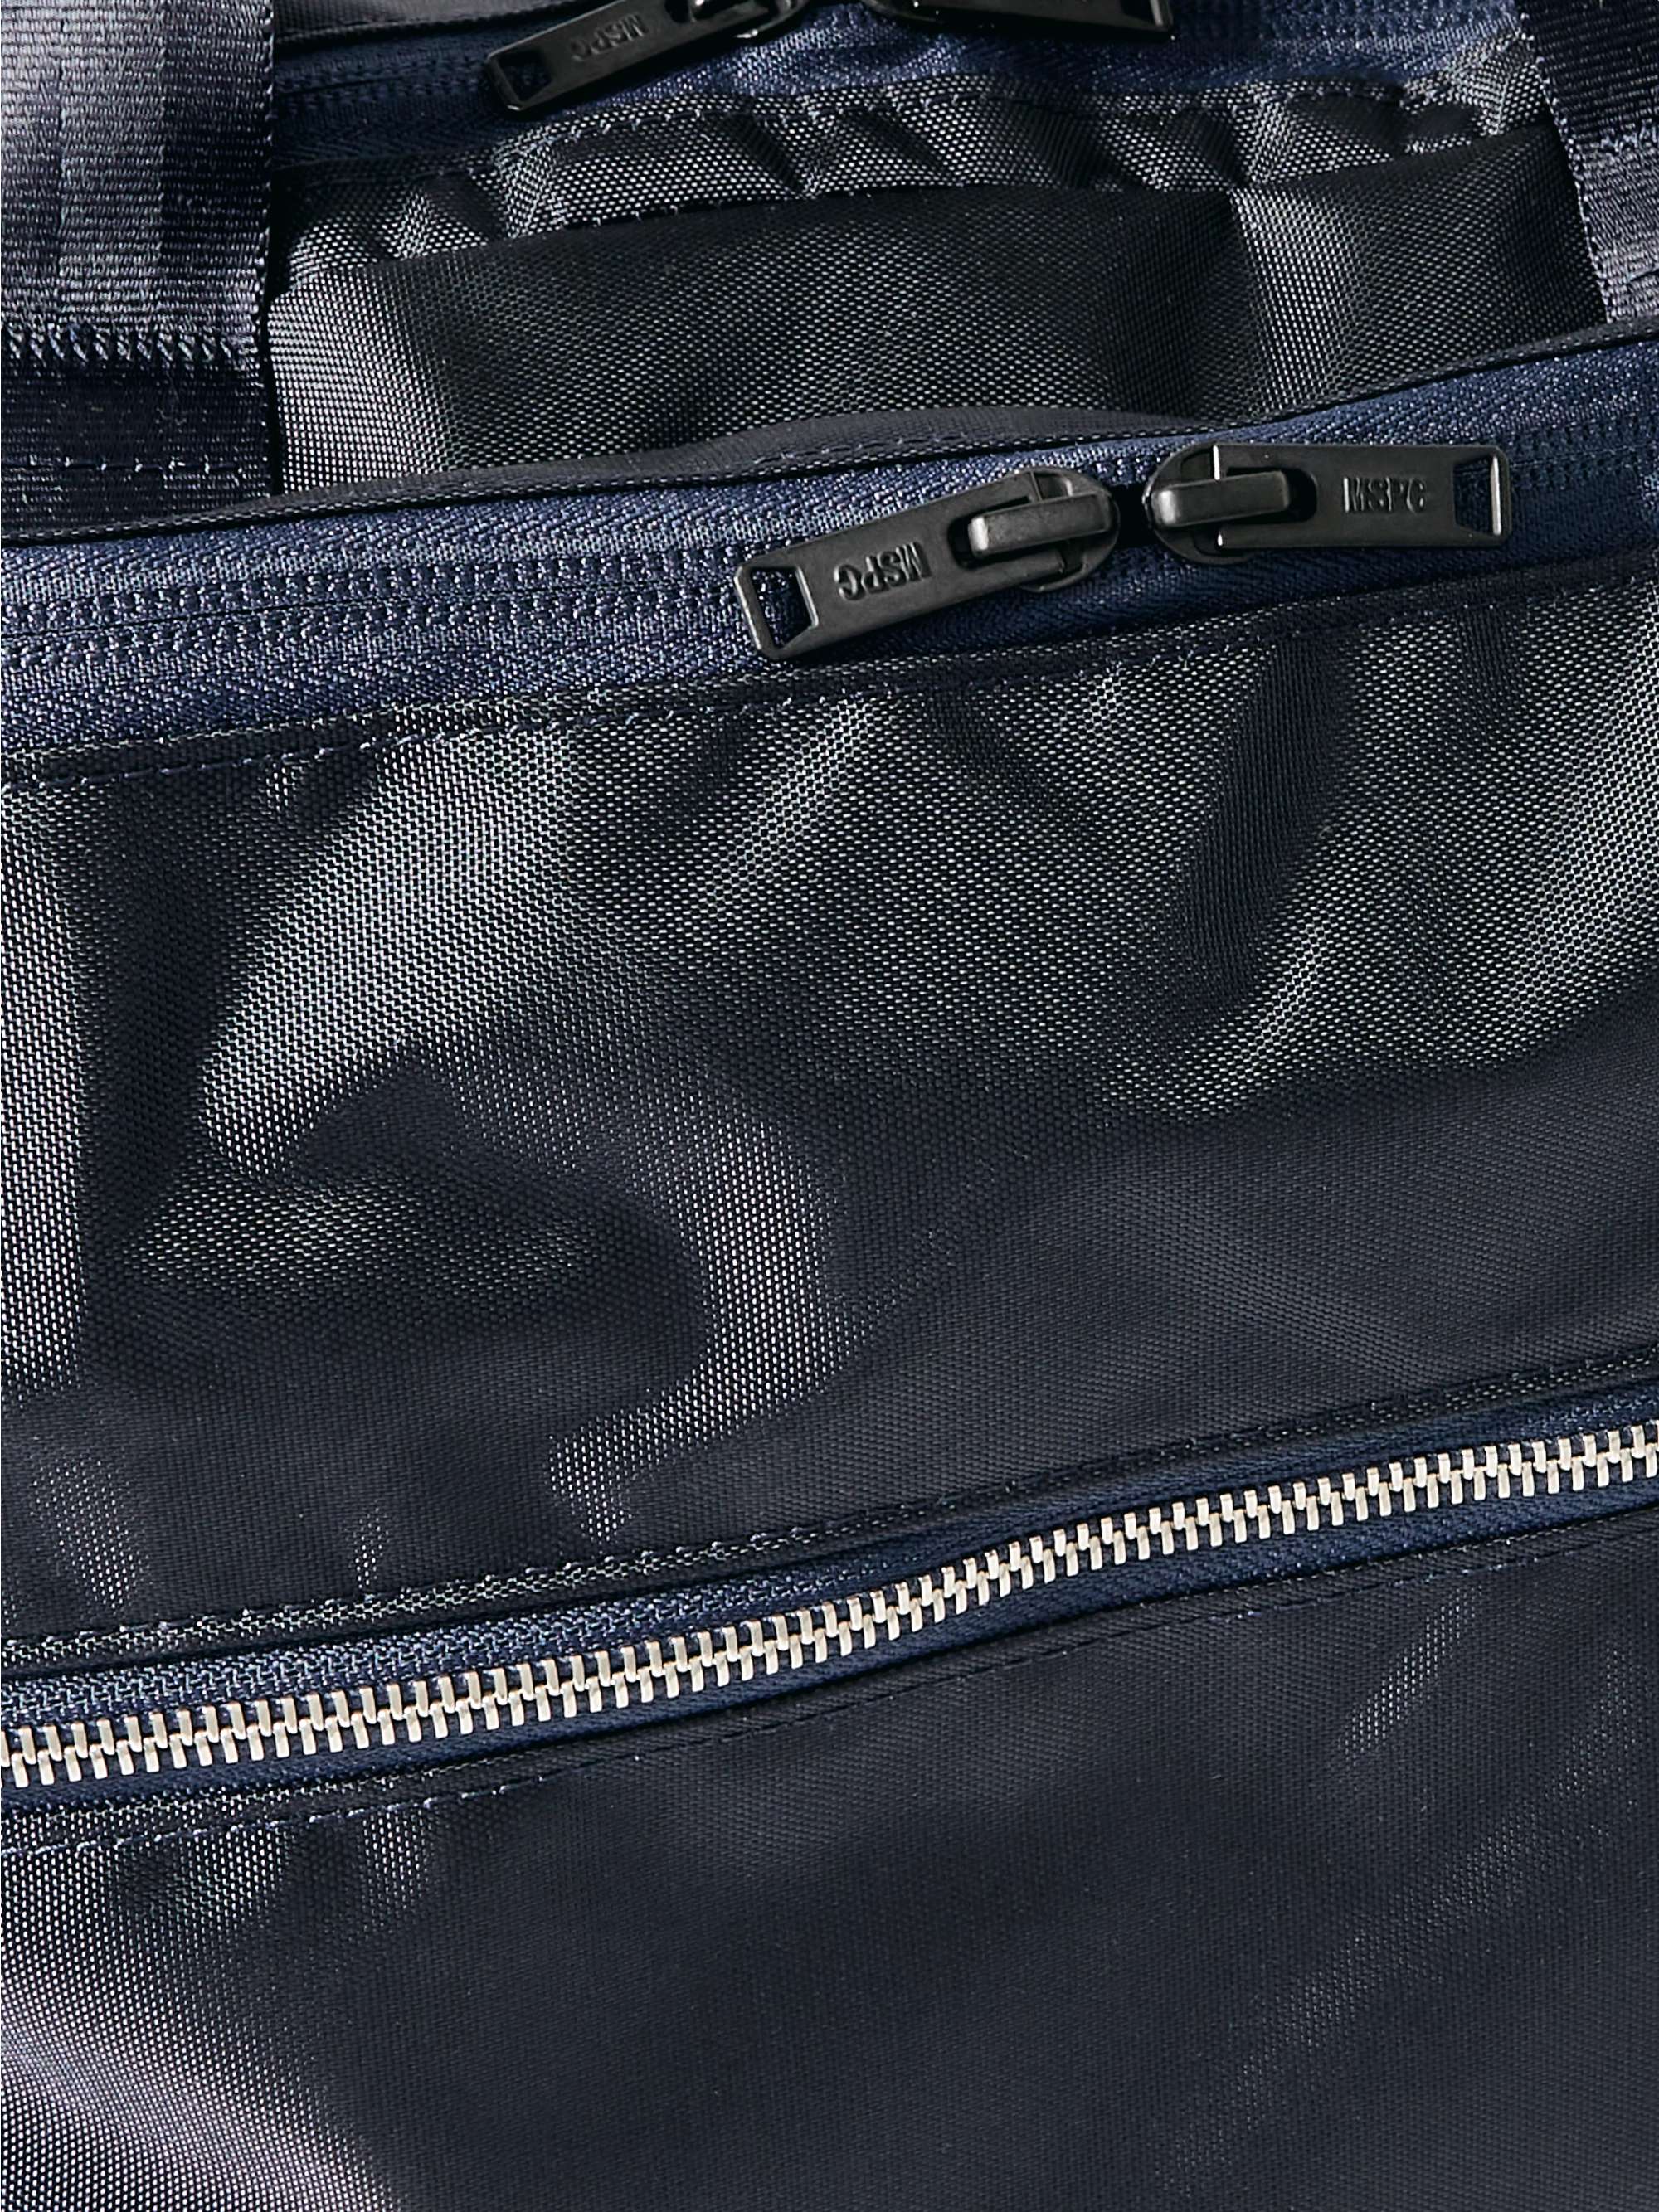 MASTER-PIECE Convertible Leather-Trimmed Nylon Messenger Bag